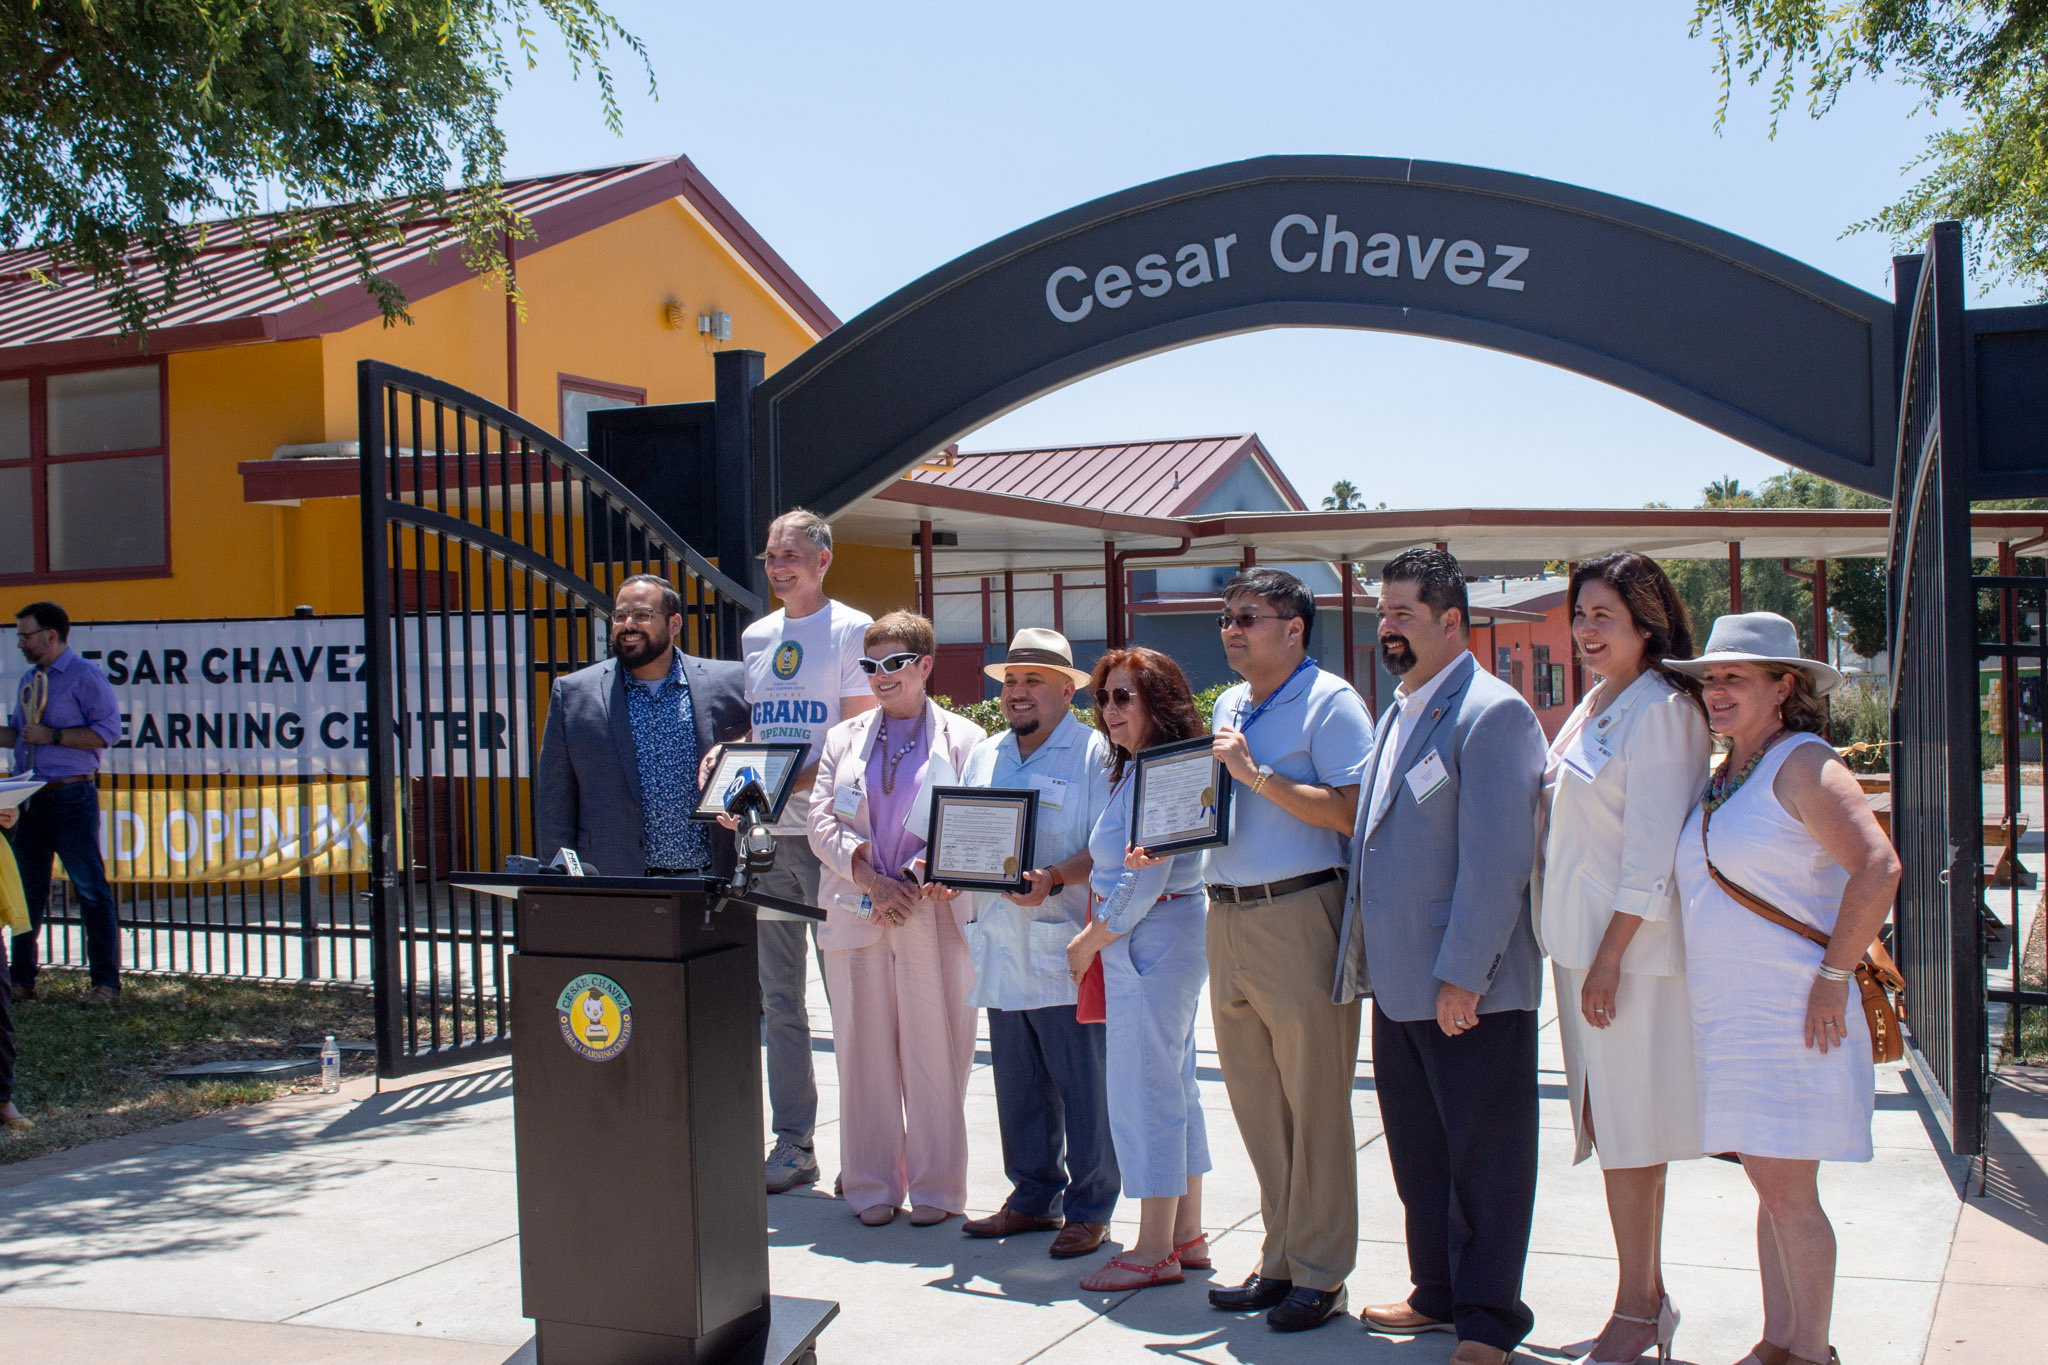 The Cesar Chavez Early Learning Center recently is open!